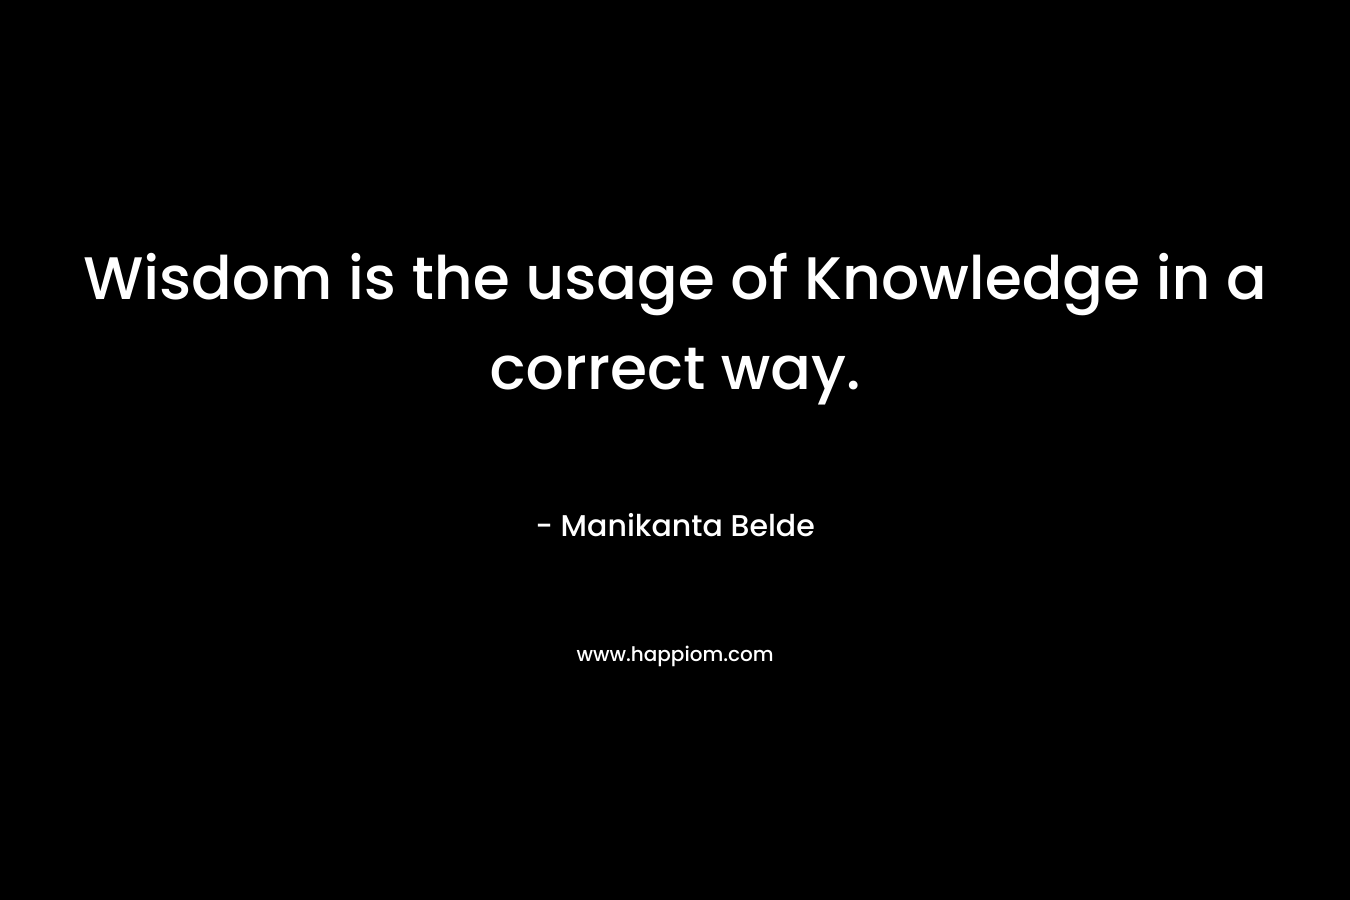 Wisdom is the usage of Knowledge in a correct way. – Manikanta Belde